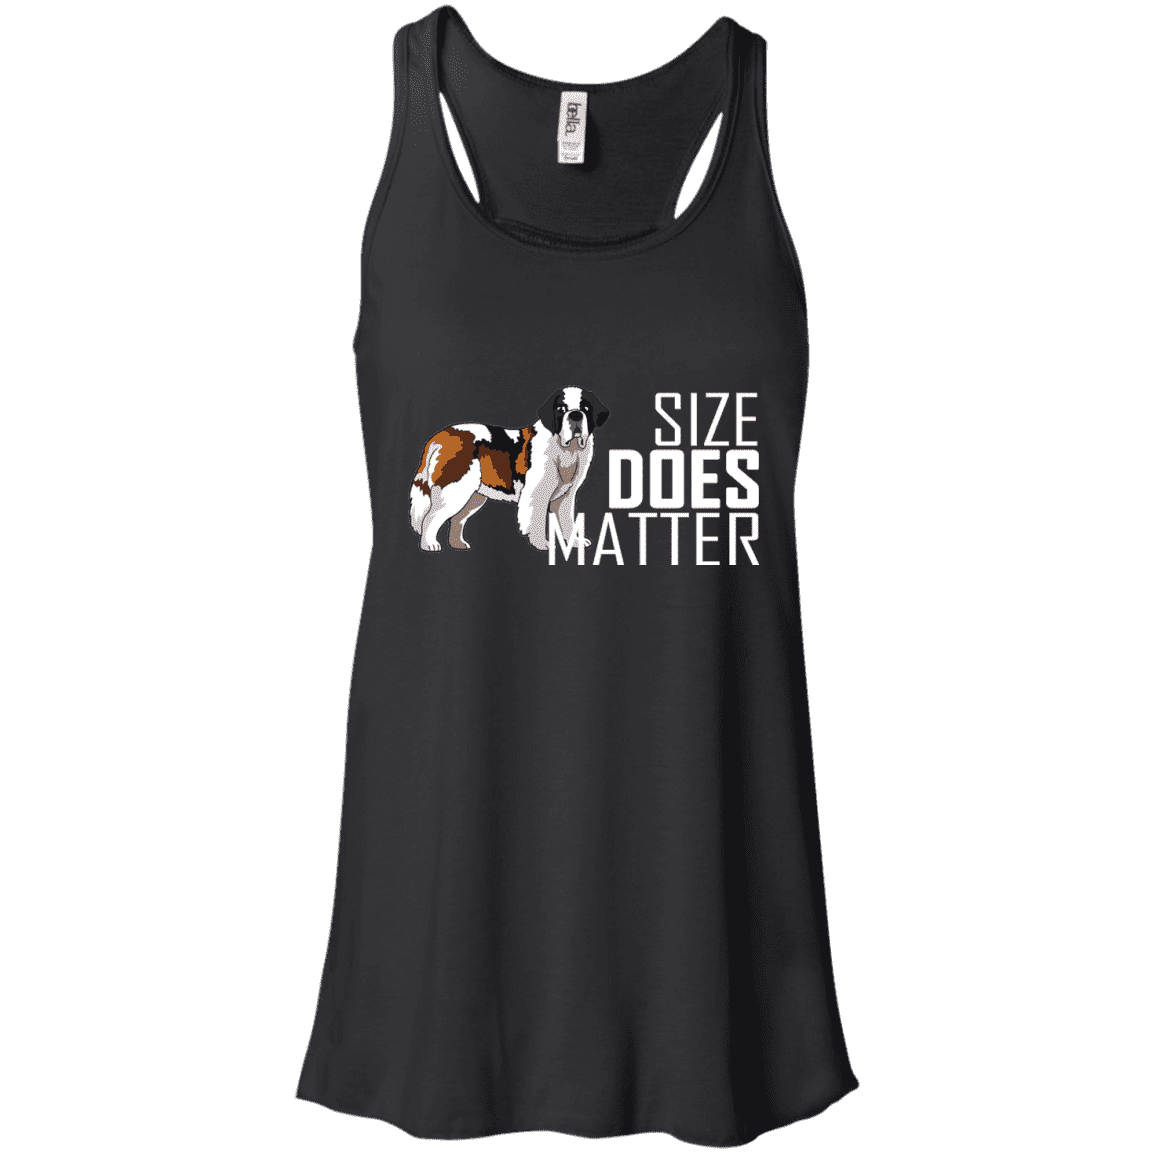 Size Does Matter Ladies Tee - STUDIO 11 COUTURE